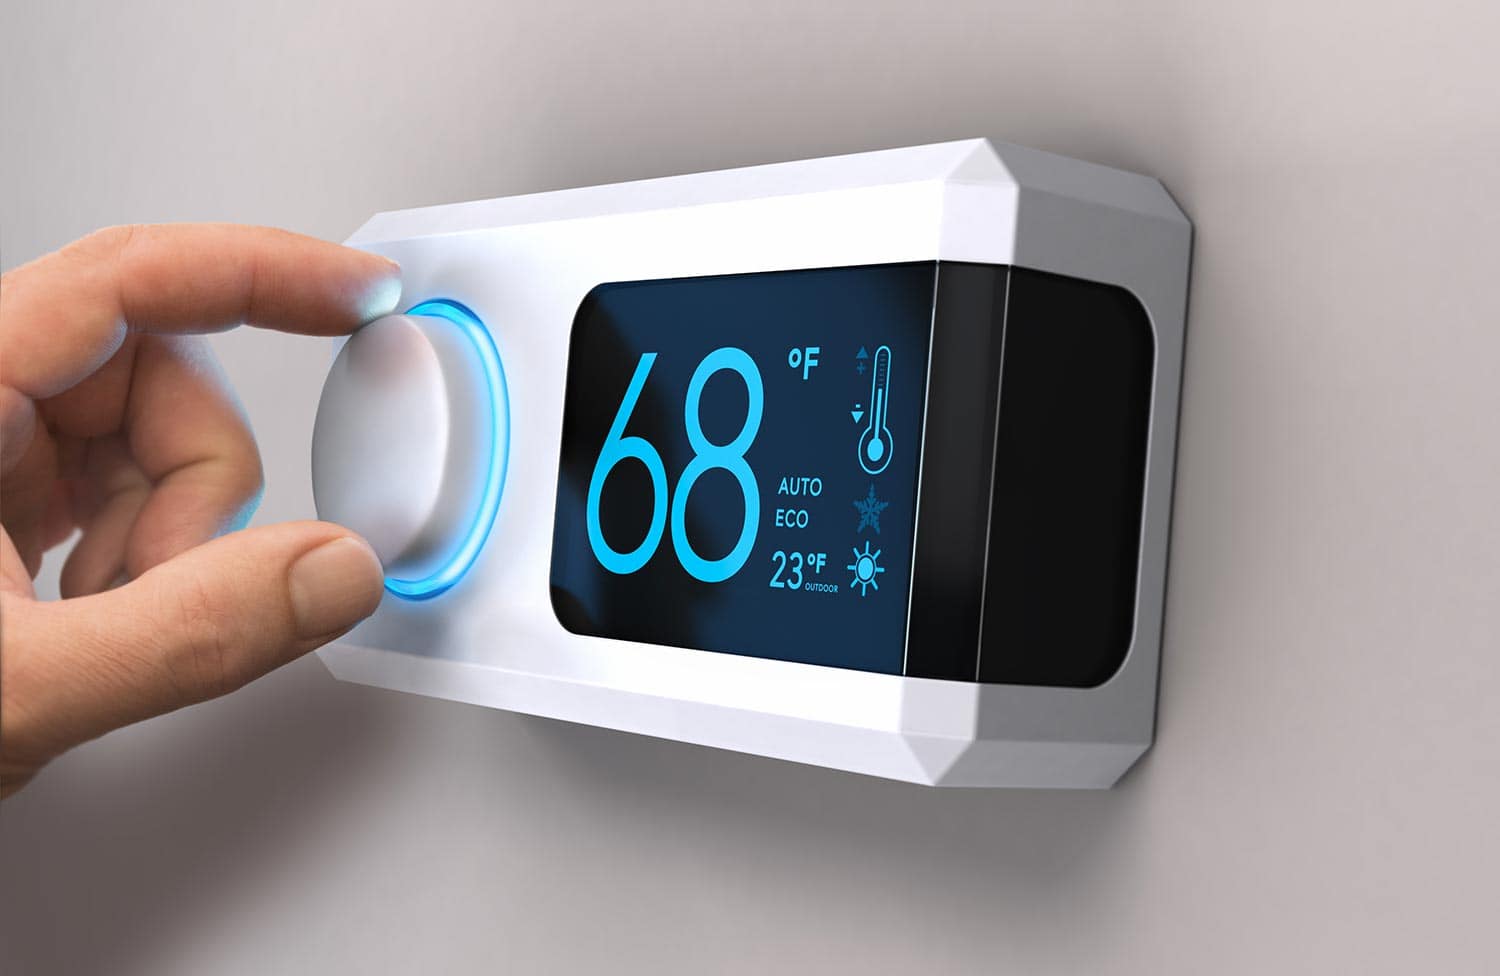 Hand turning a home thermostat knob to set temperature on energy saving mode